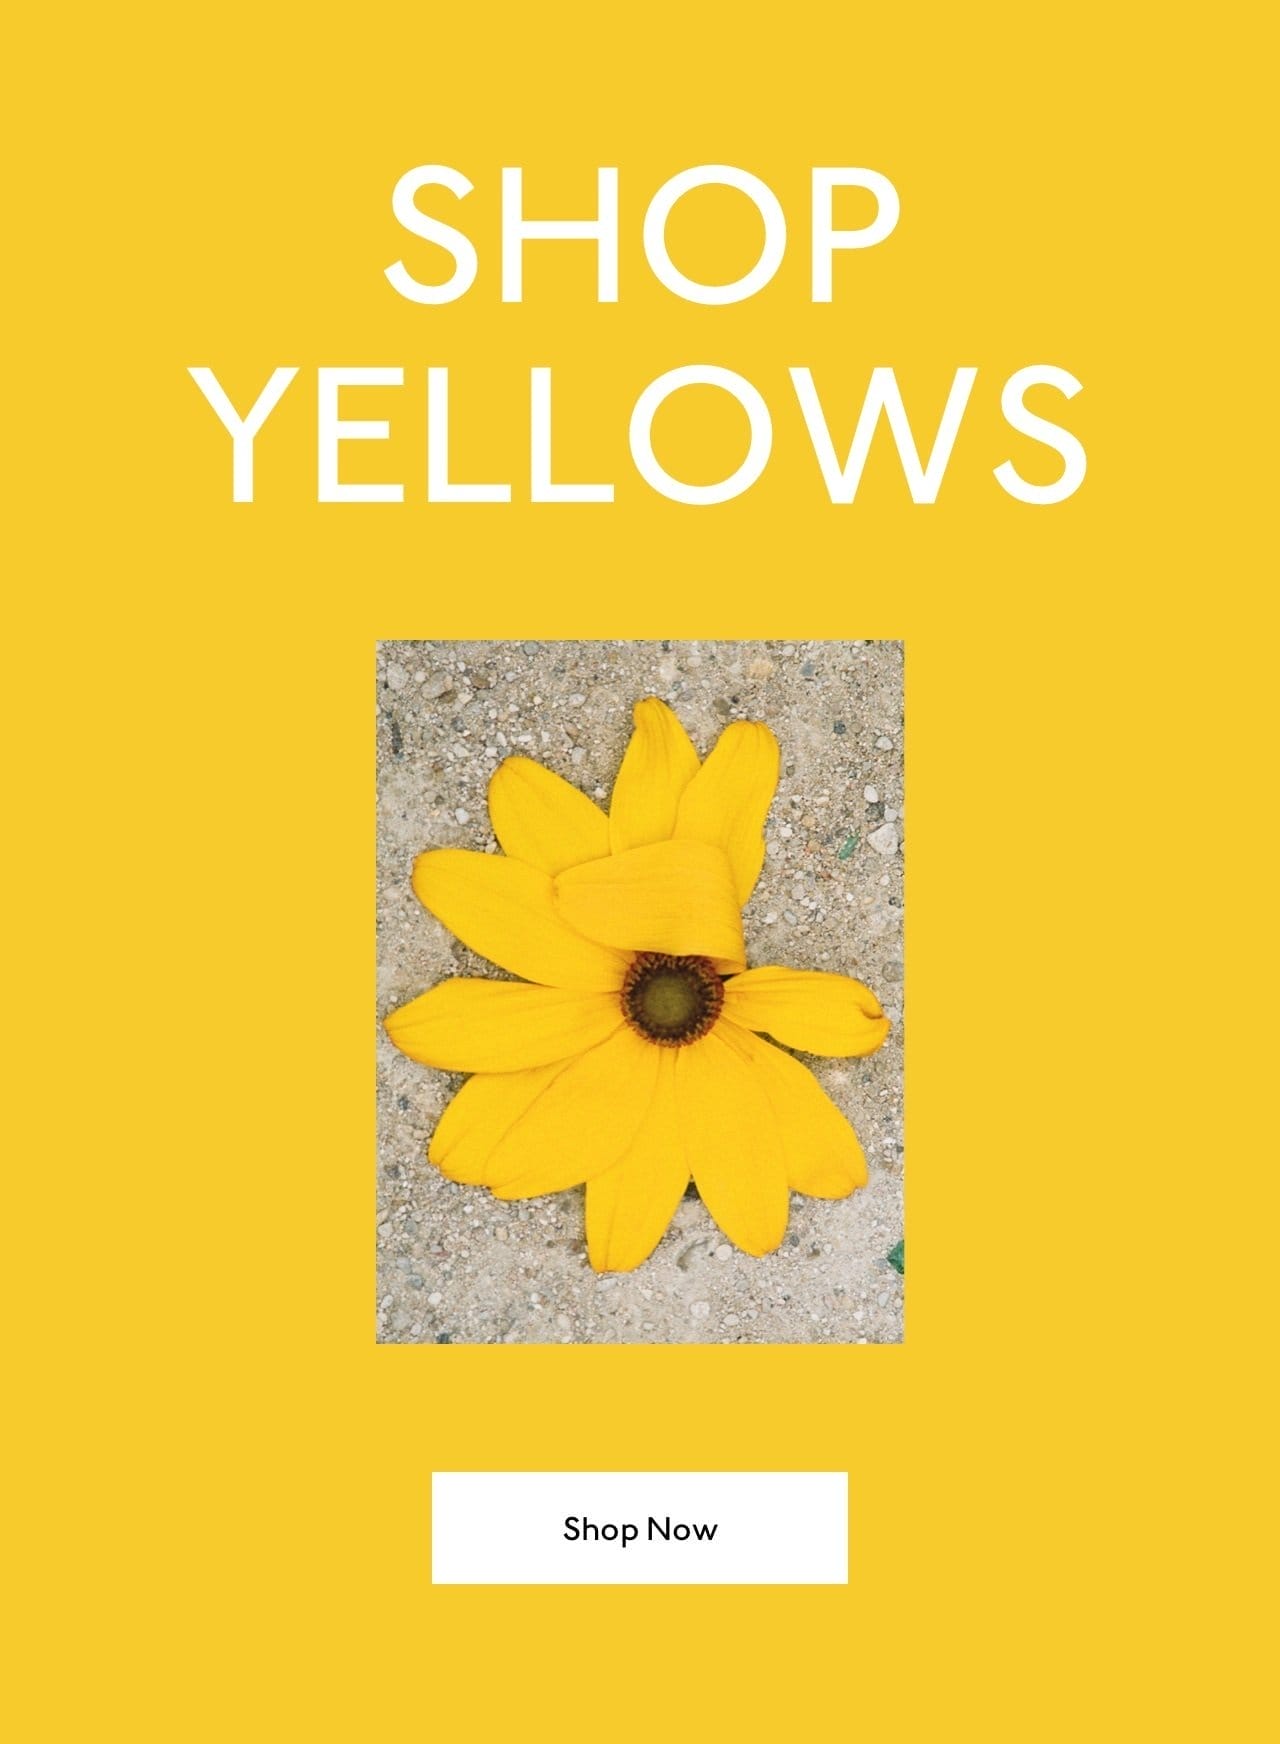 Shop now. Pictured: a beautiful yellow flower.